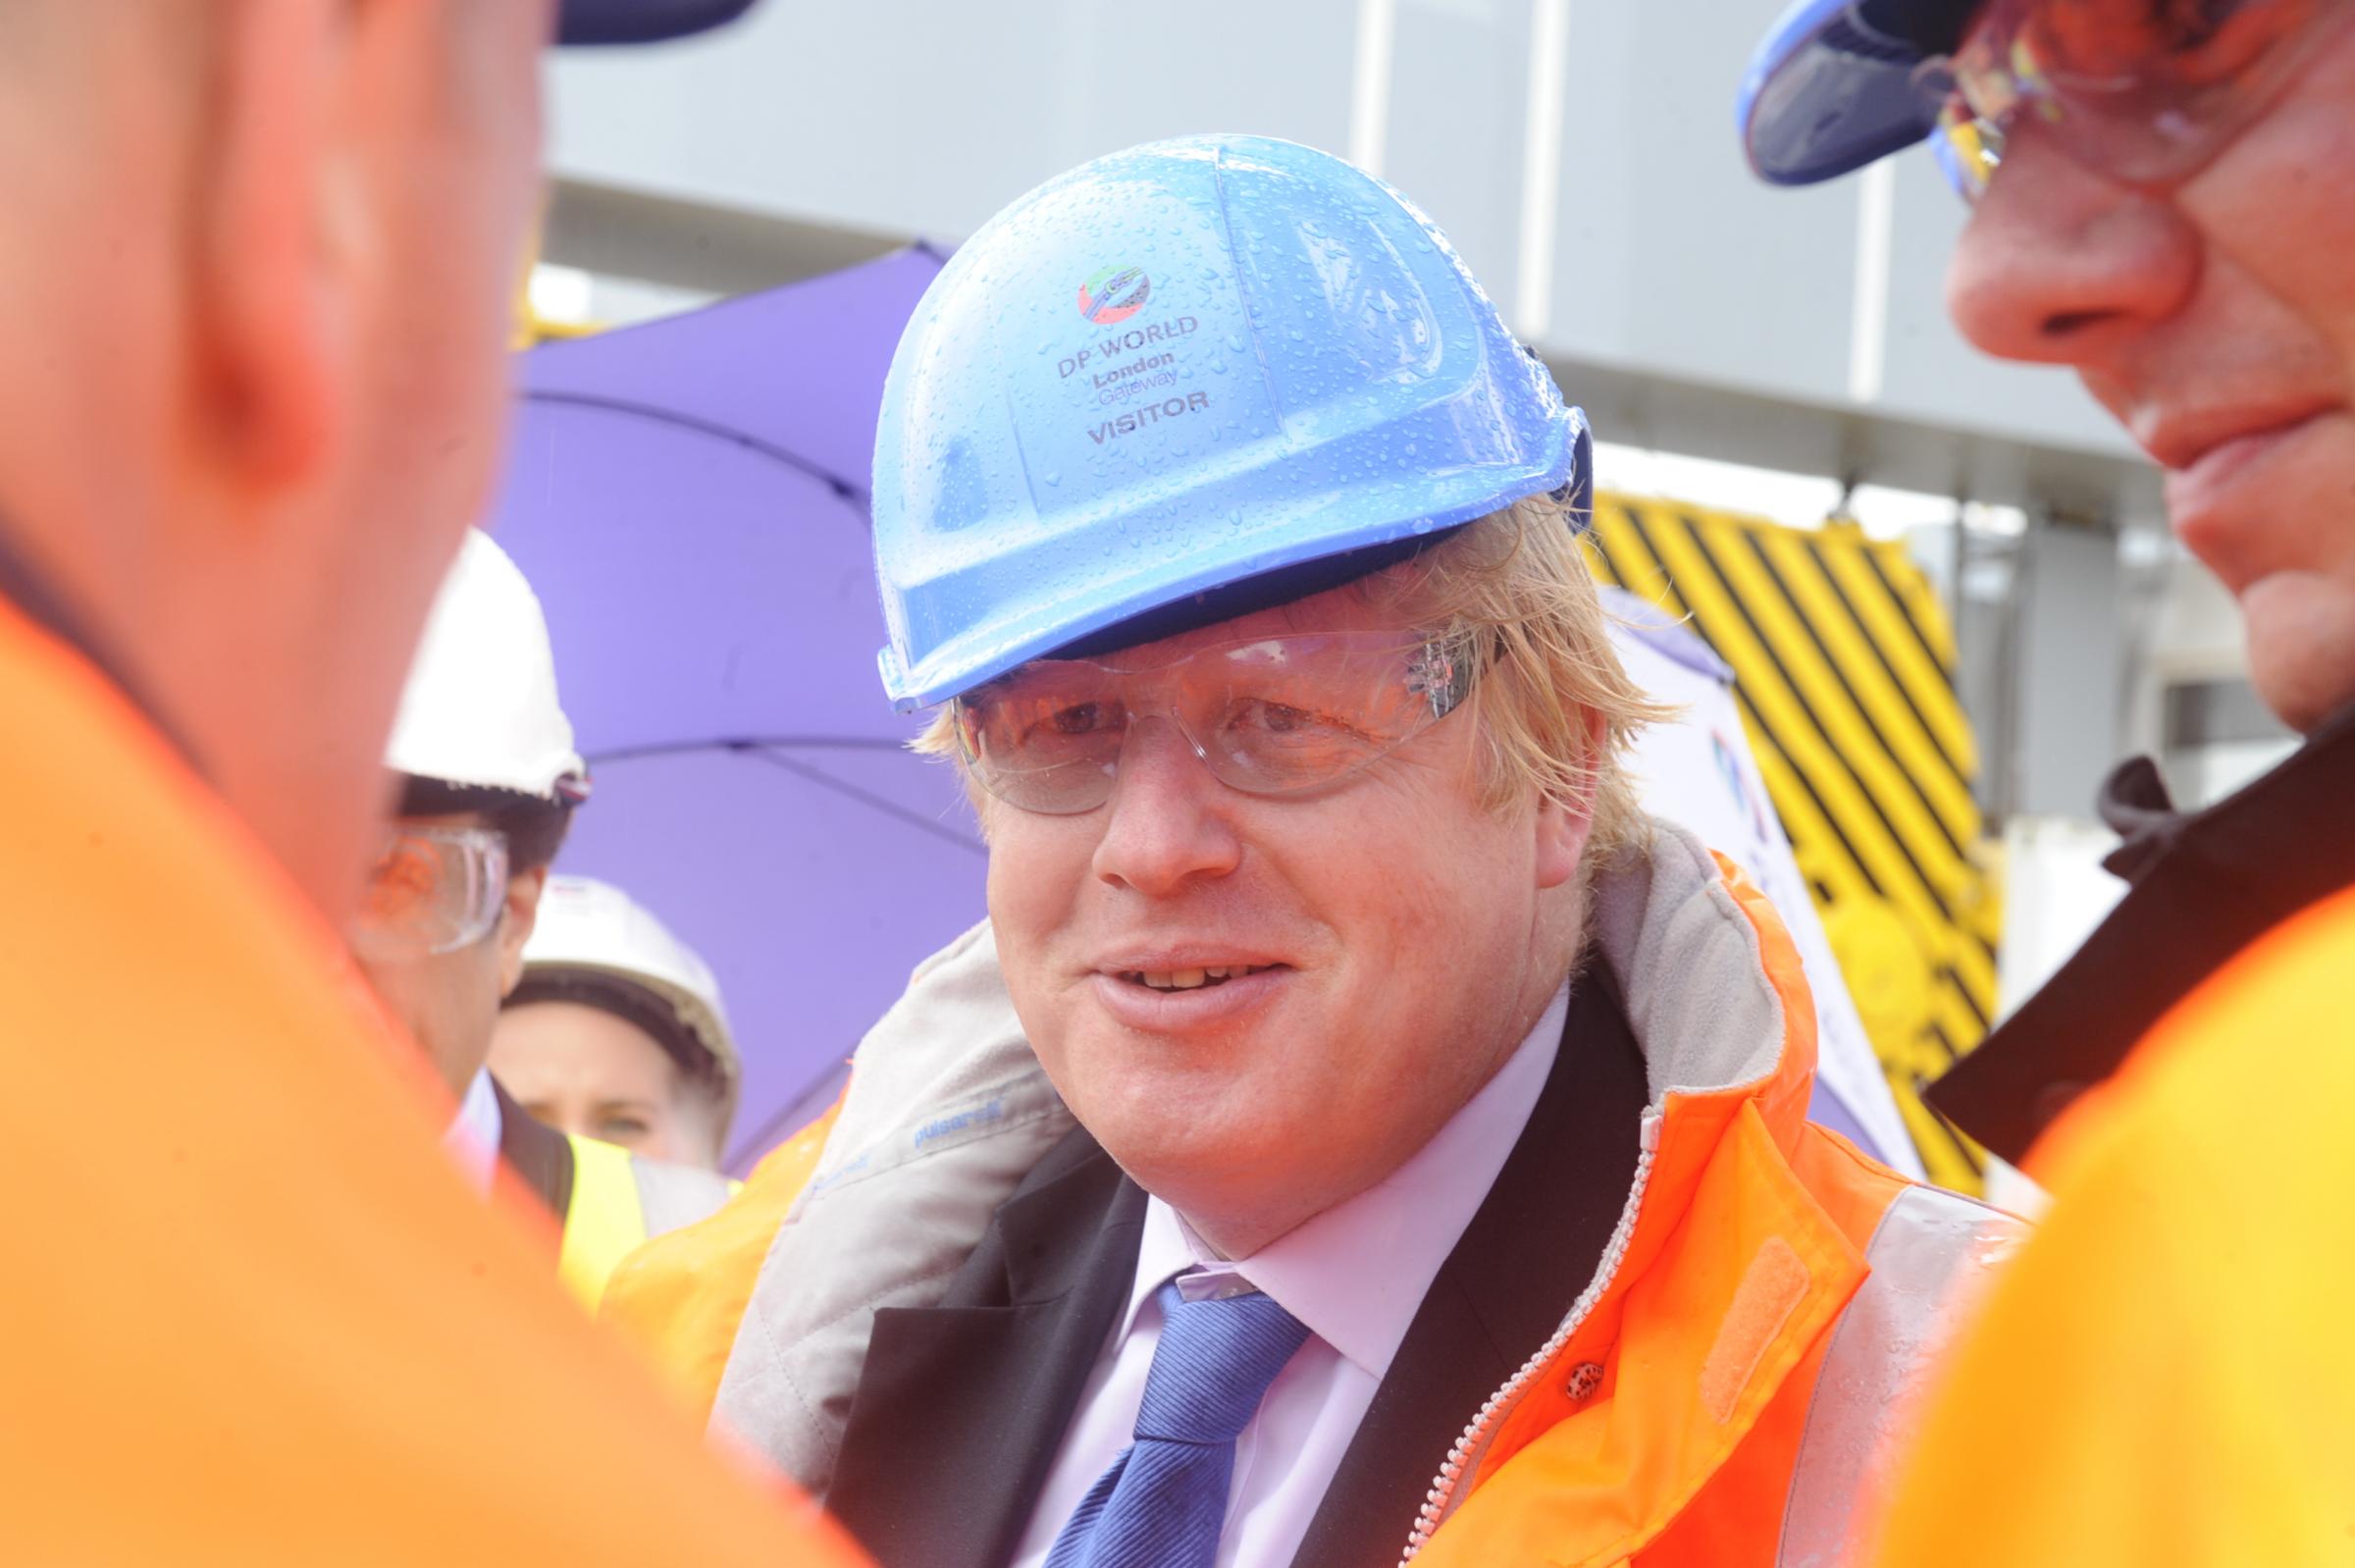 Safety first - Prime Minister Boris Johnson paid a visit to the DP World London Gateway in Corringham while he was still Mayor of London in 2013